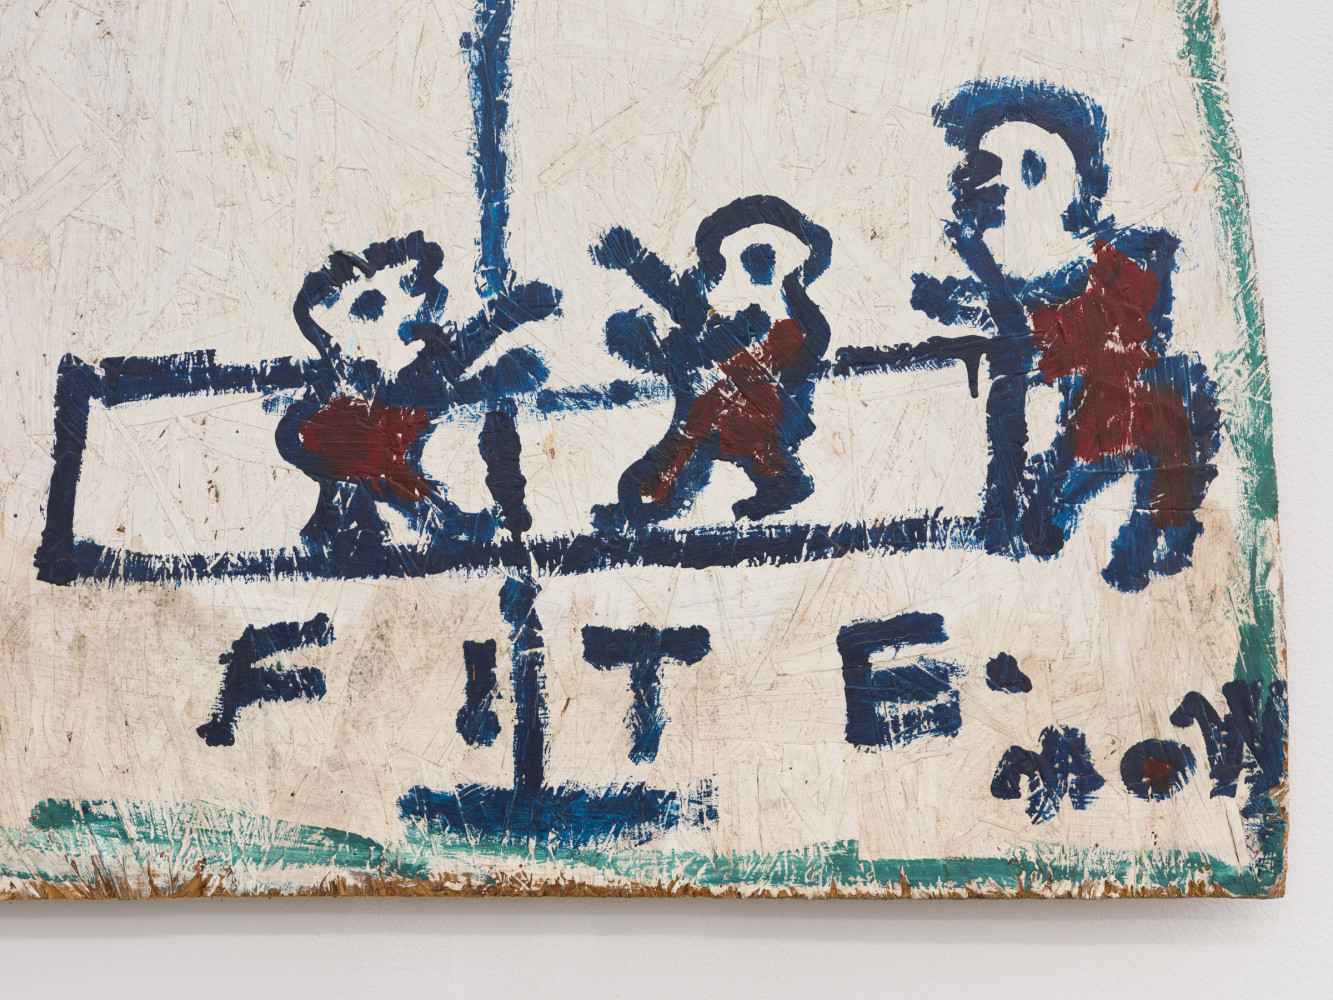 Willie&amp;nbsp;Jinks
Untitled (&amp;quot;Fite&amp;quot;), ca 1980s
(detail view)